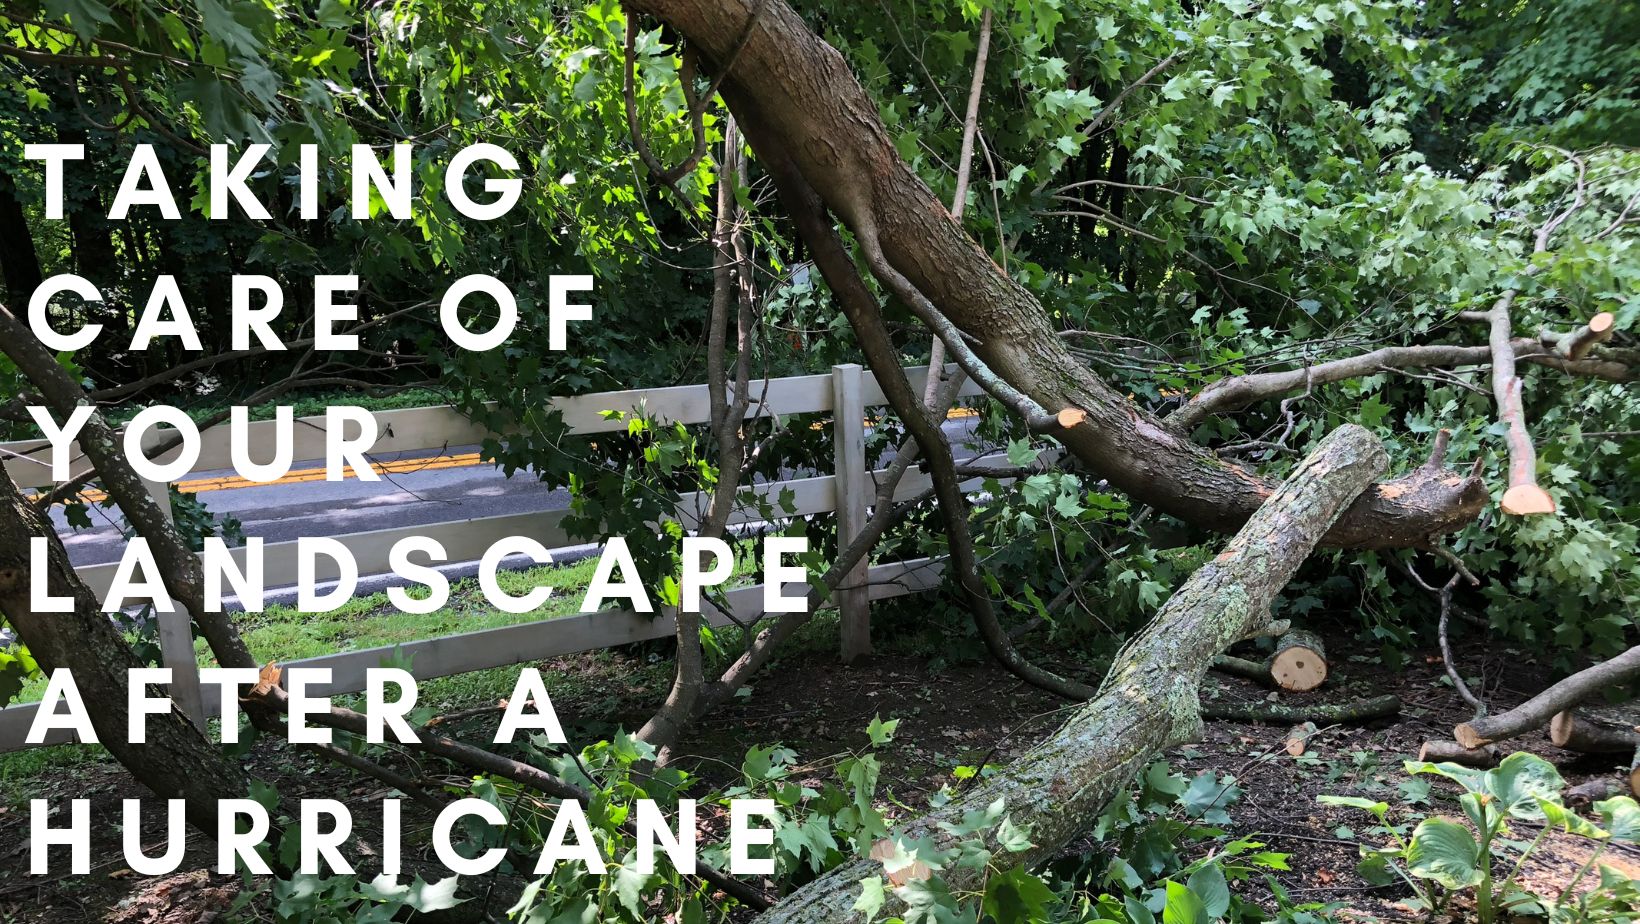 Taking Care of Your Landscape After a Hurricane